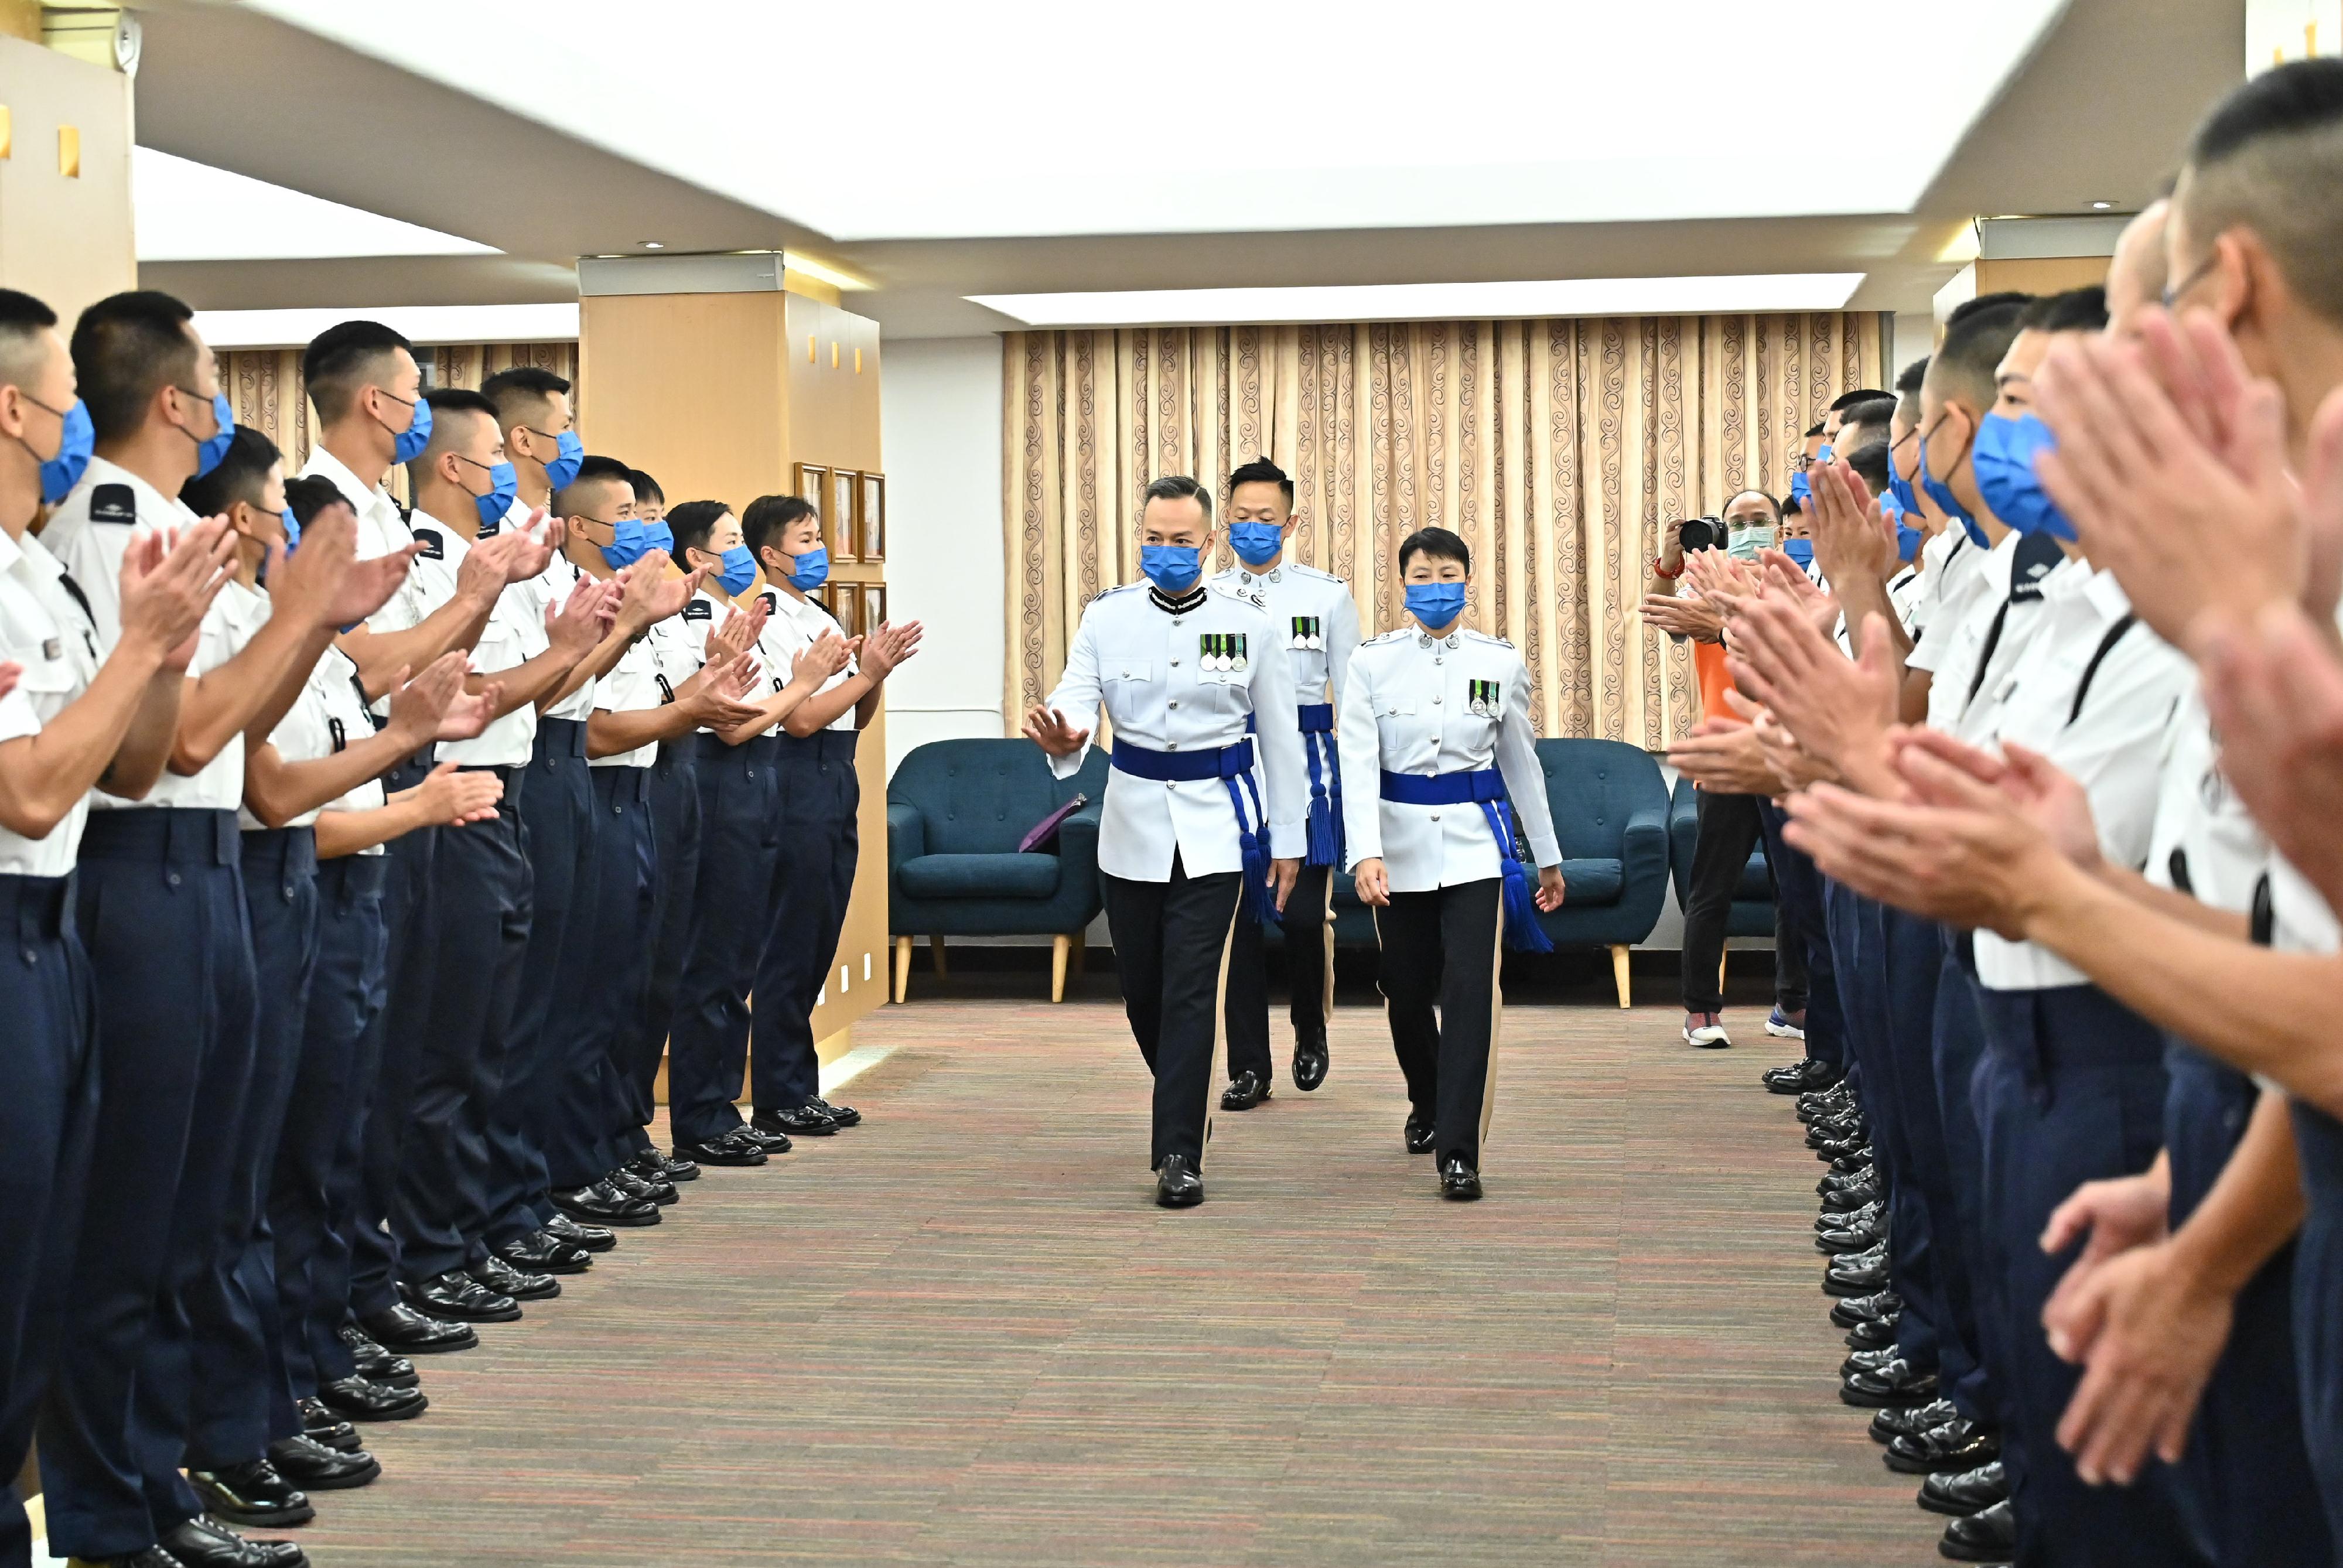 The Deputy Commissioner of Police (Management), Mr Chow Yat-ming, congratulates probationary inspectors after the passing-out parade held at the Hong Kong Police College today (September 17).